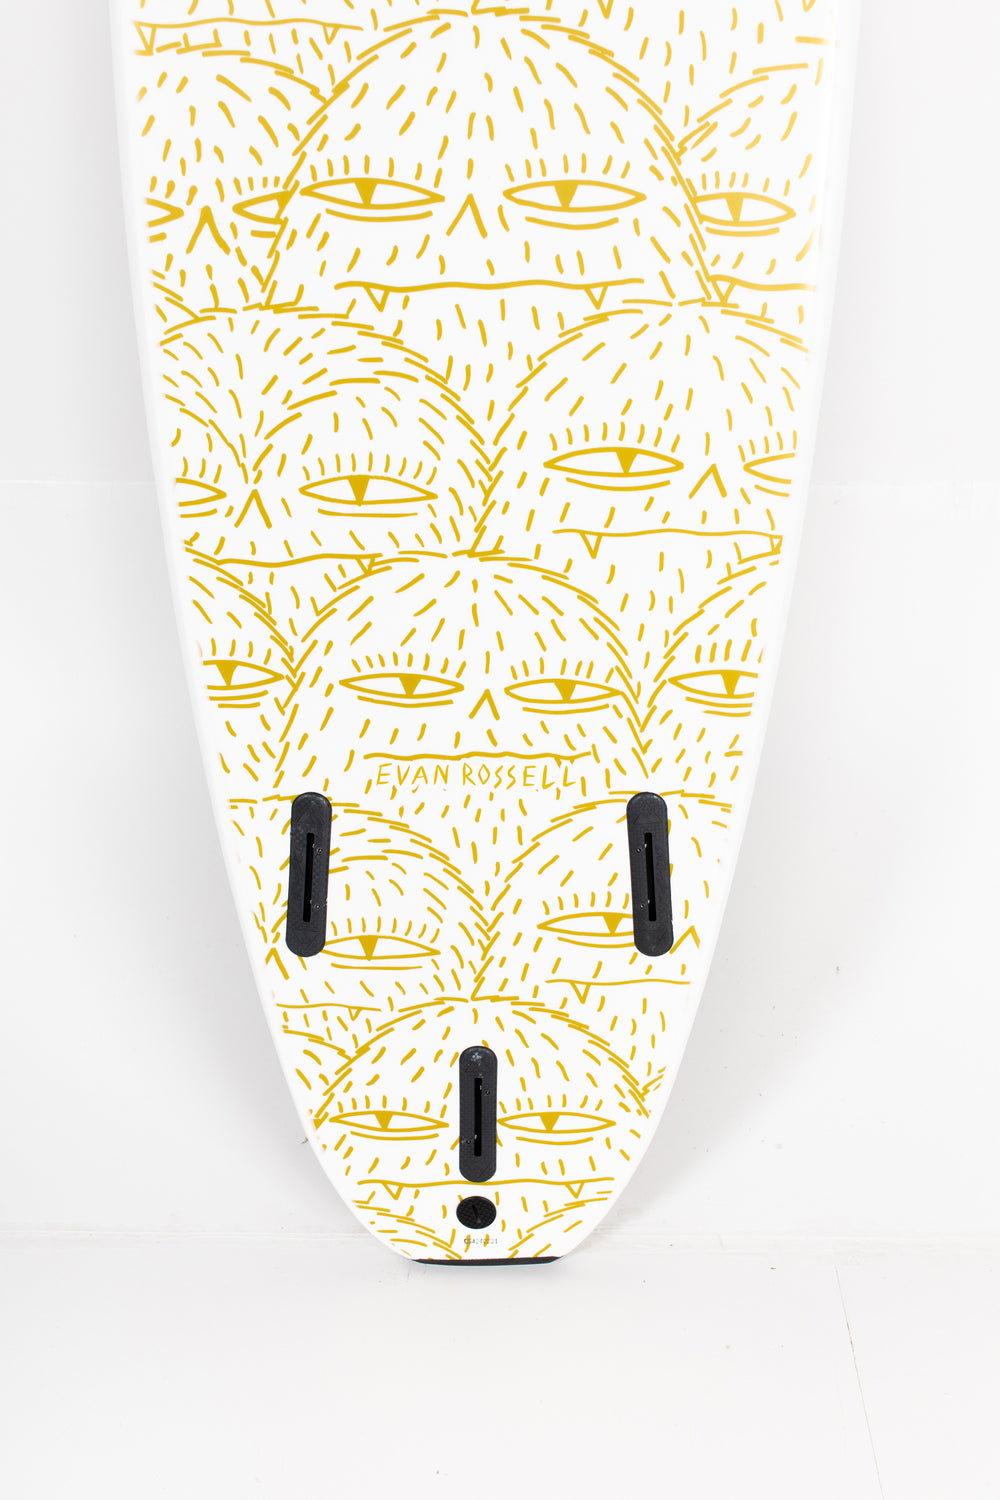 CATCH SURF LOG x EVAN ROSSELL PRO | Buy at PUKAS SURF SHOP